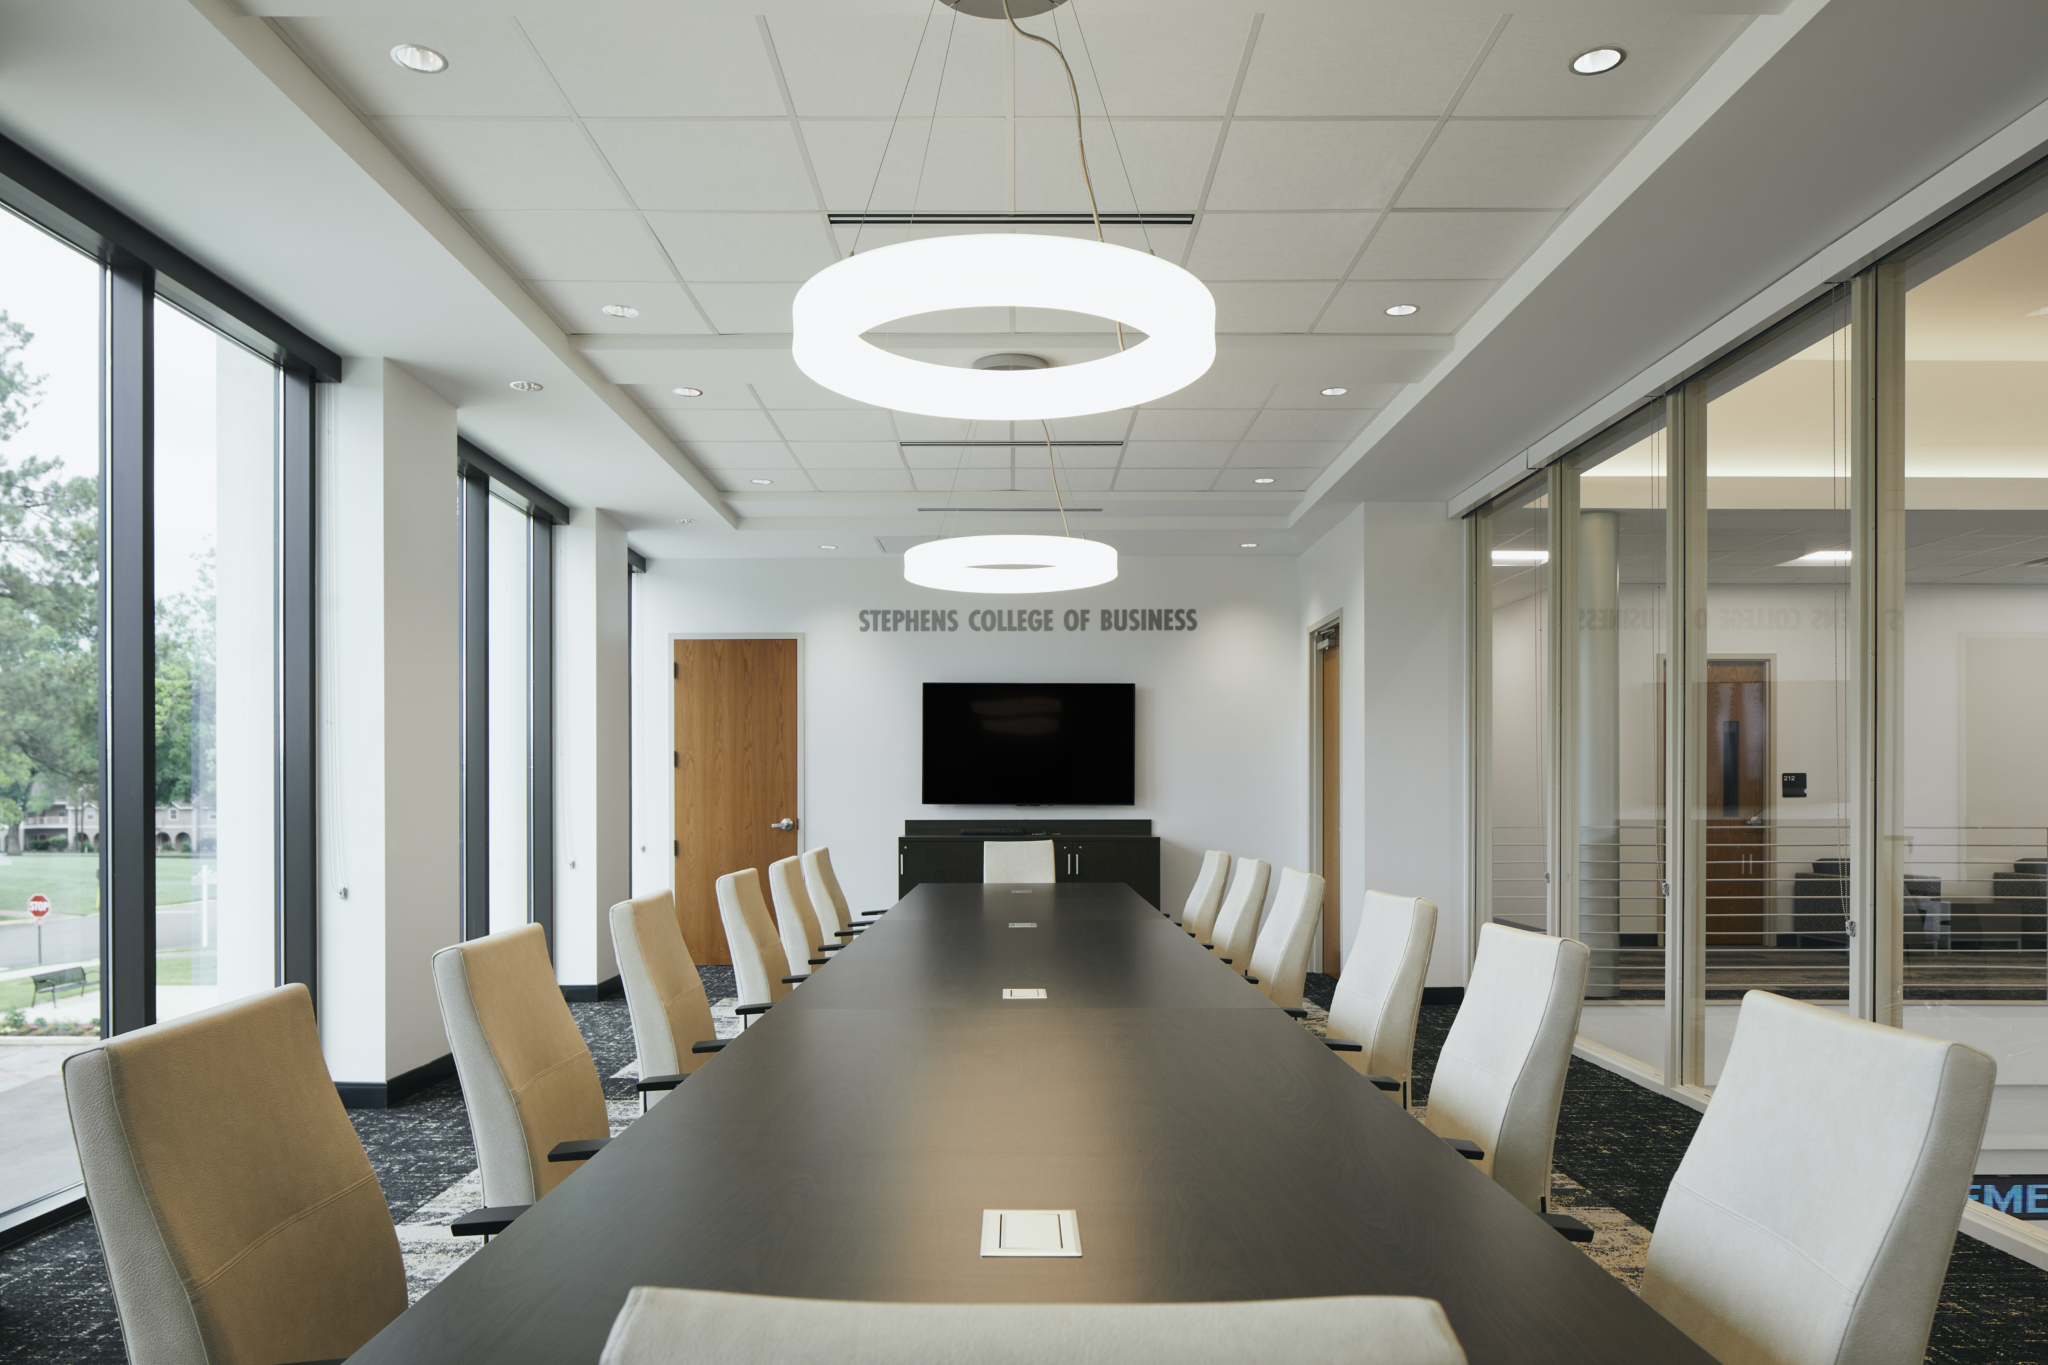 board rooms are one of the classroom design trends